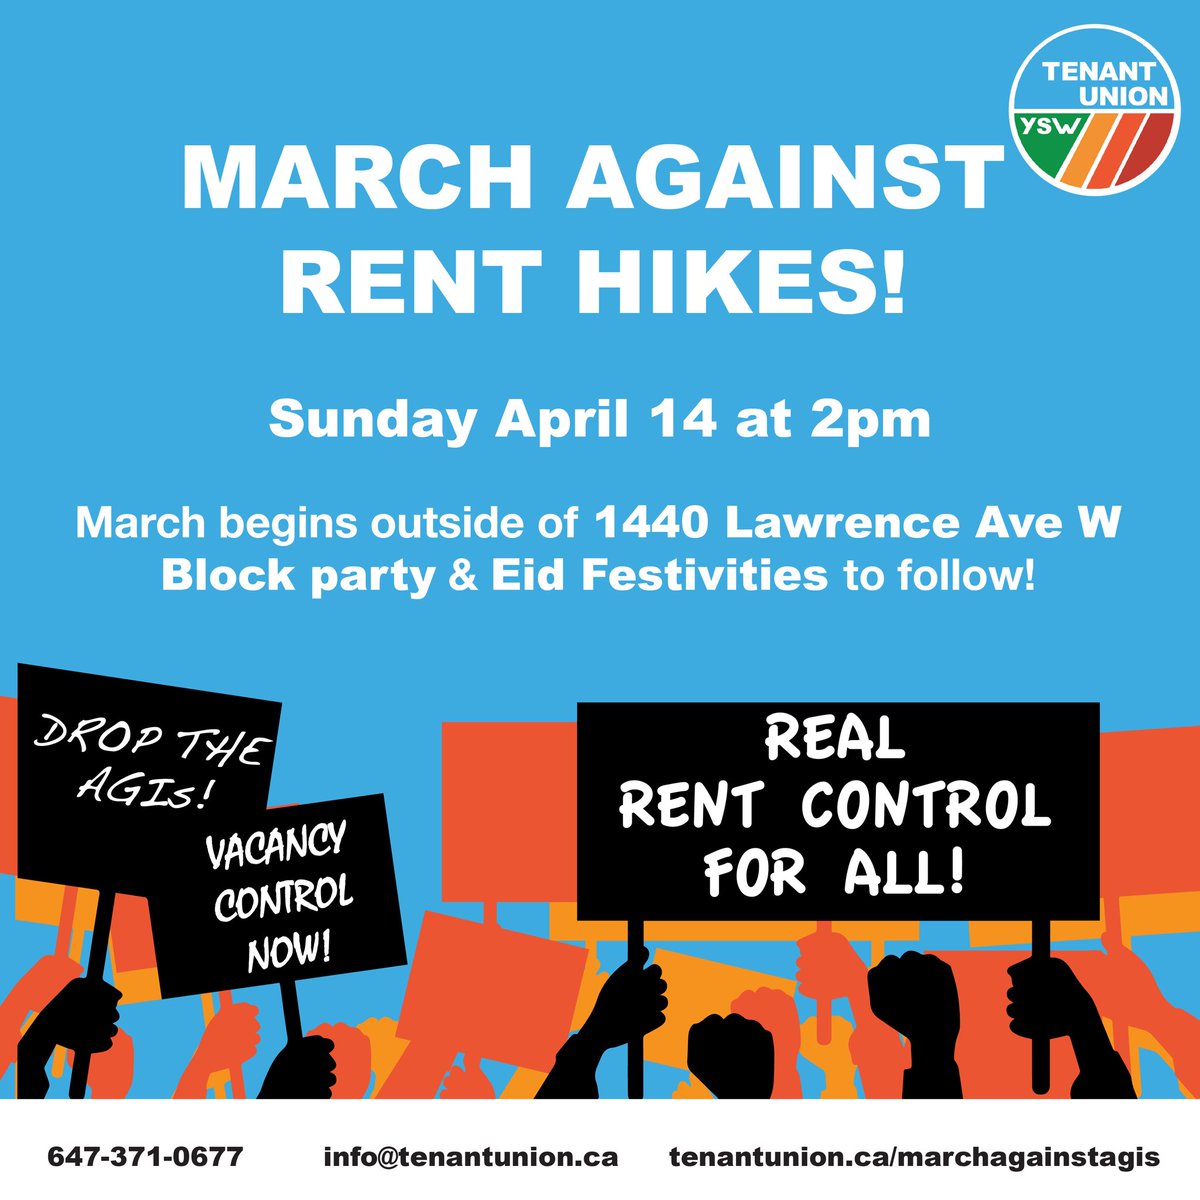 Join us this Sunday April 14 at 2pm to march against rent hikes! March will begin and 1440 Lawrence Ave W and conclude with a block party, Eid festivities and fun for the whole family! tenantunion.ca/marchagainstag…